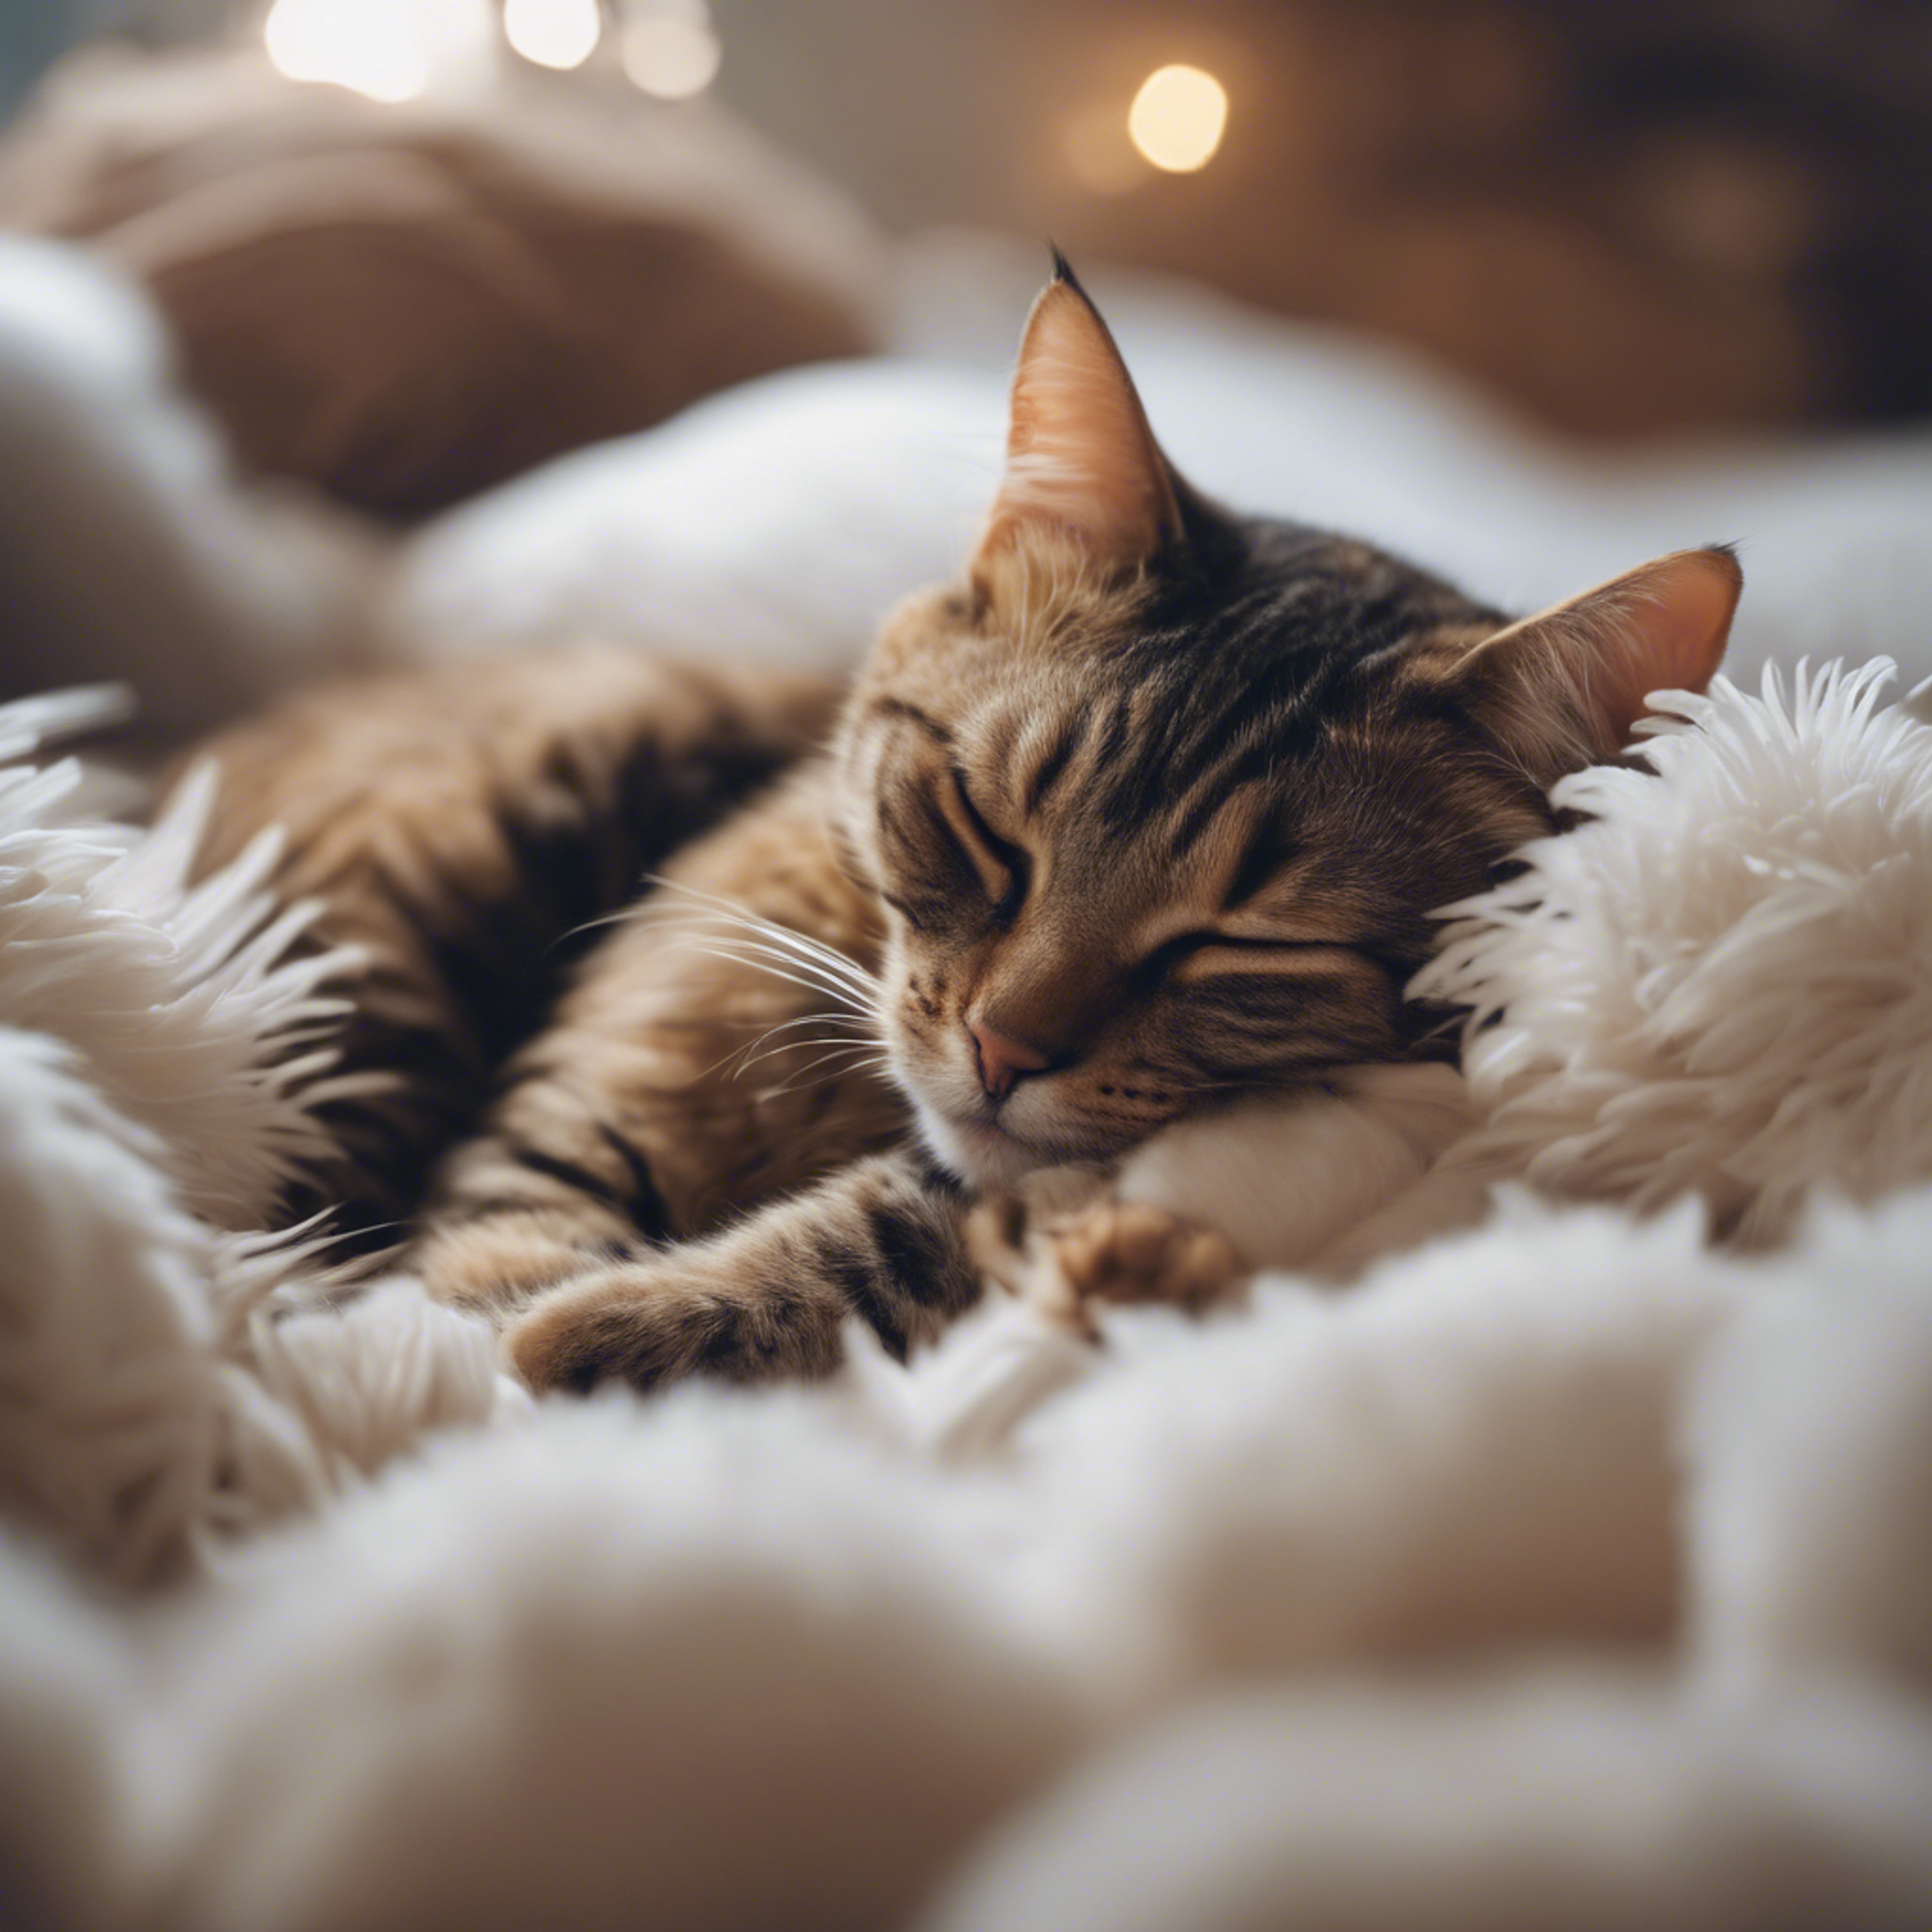 A cat sleeping soundly, completely submerged in a sea of cozy, fluffy pillows. Fond d'écran[9e78fe4df88a4e90bb06]